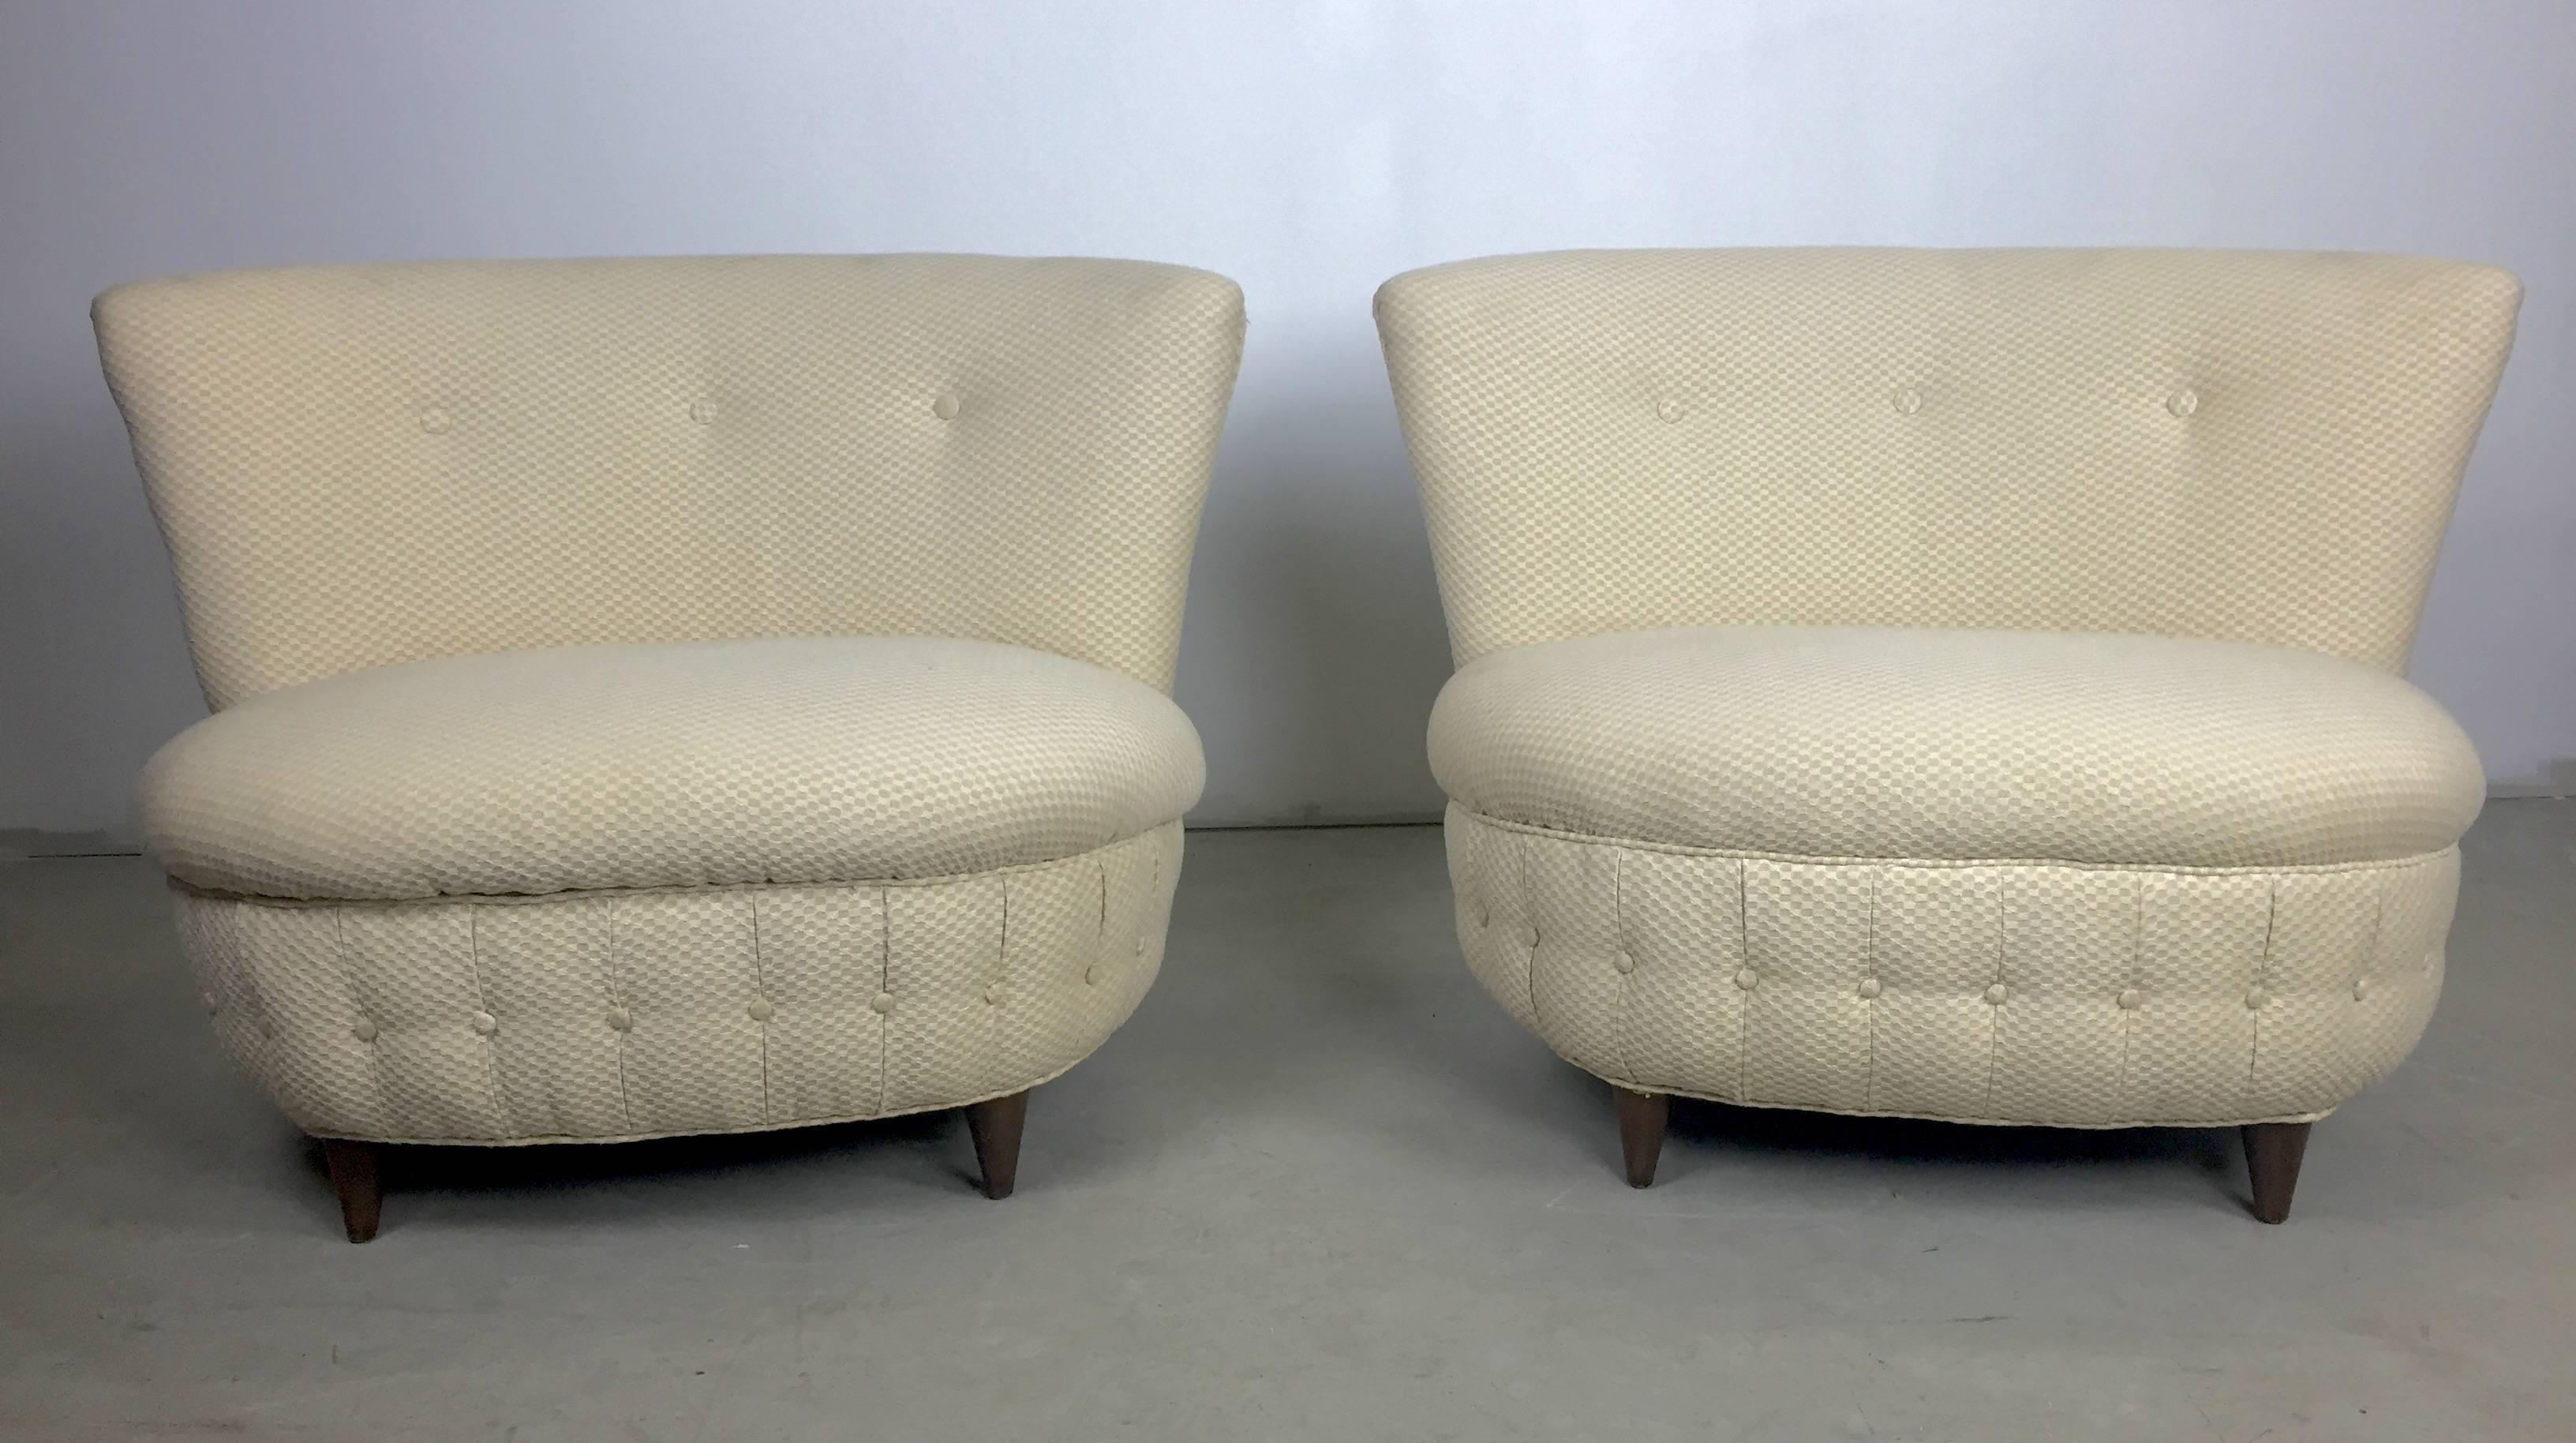 Mid-20th Century Pair of Button Tufted Slipper Chairs by Gilbert Rohde For Sale